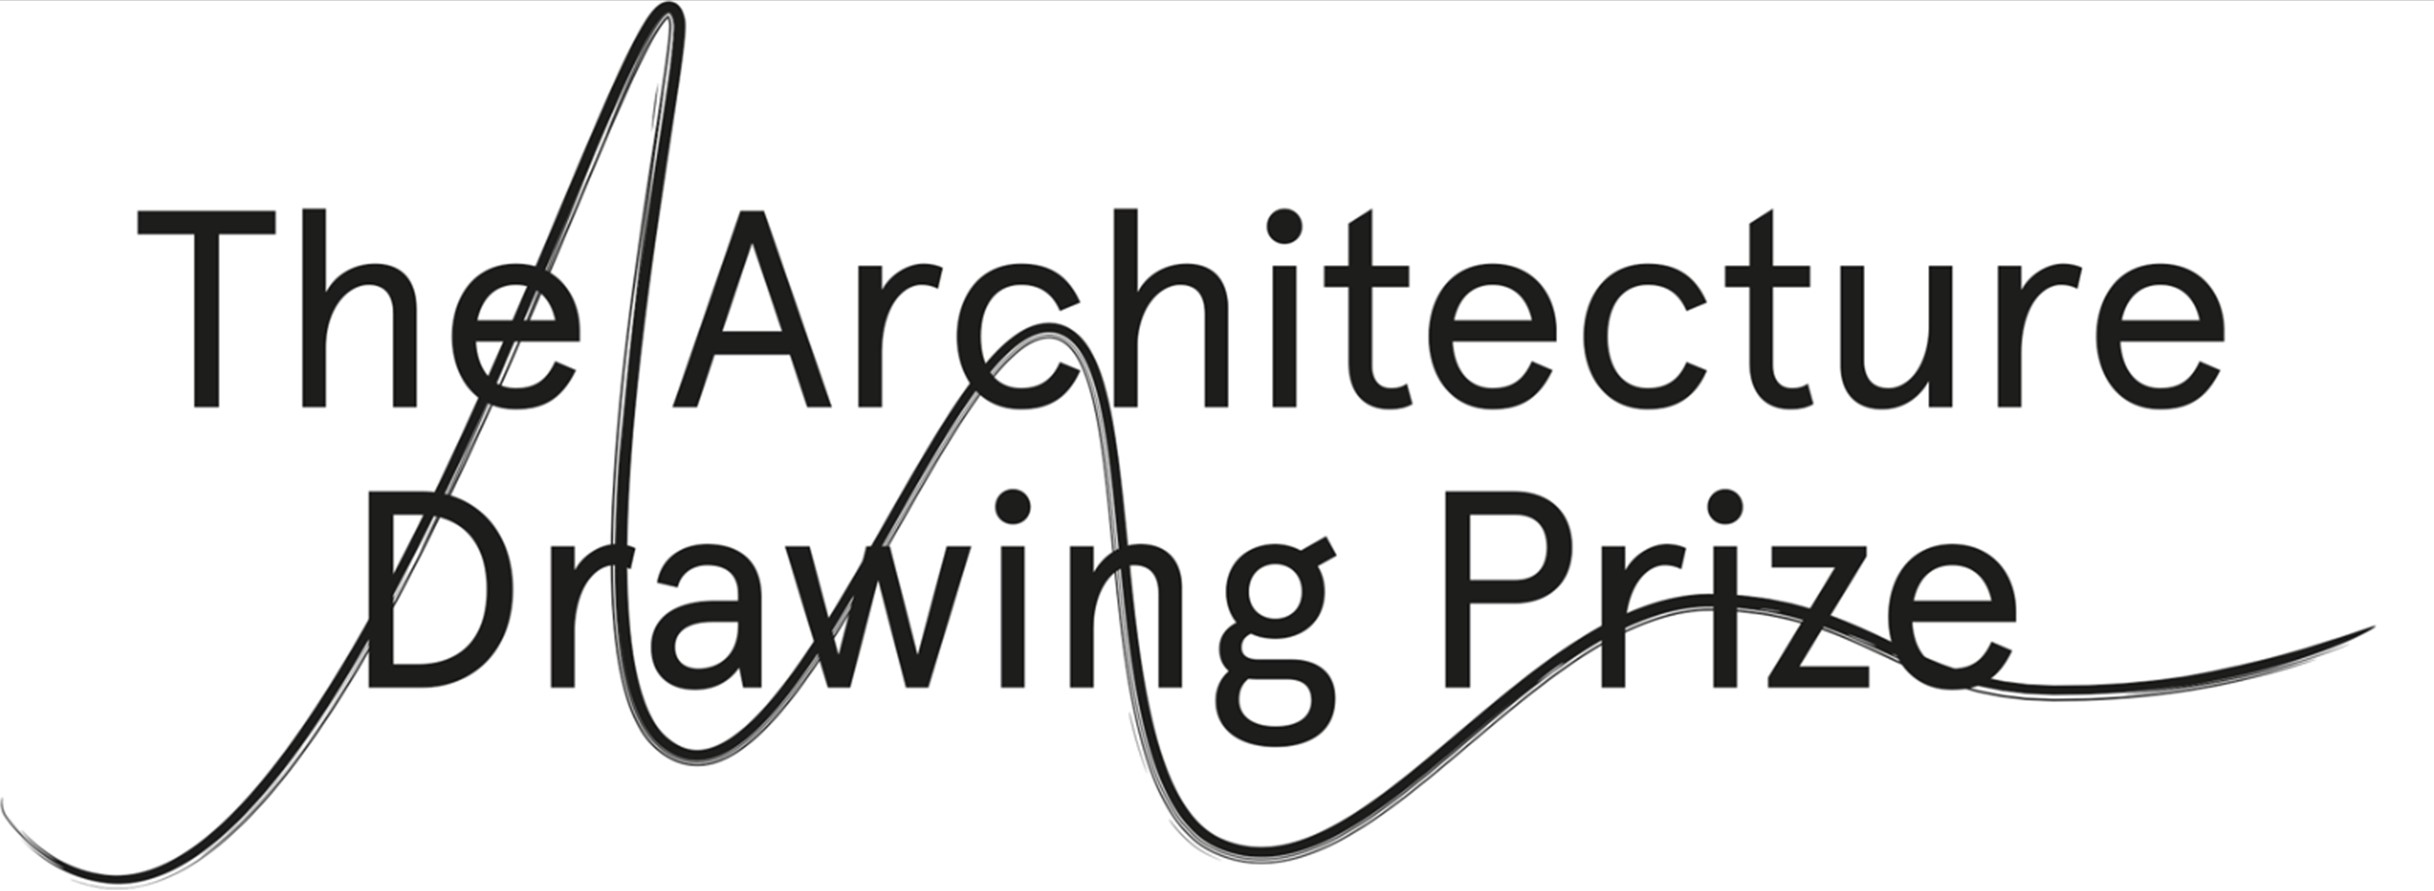 The Architecture Drawing Prize logo